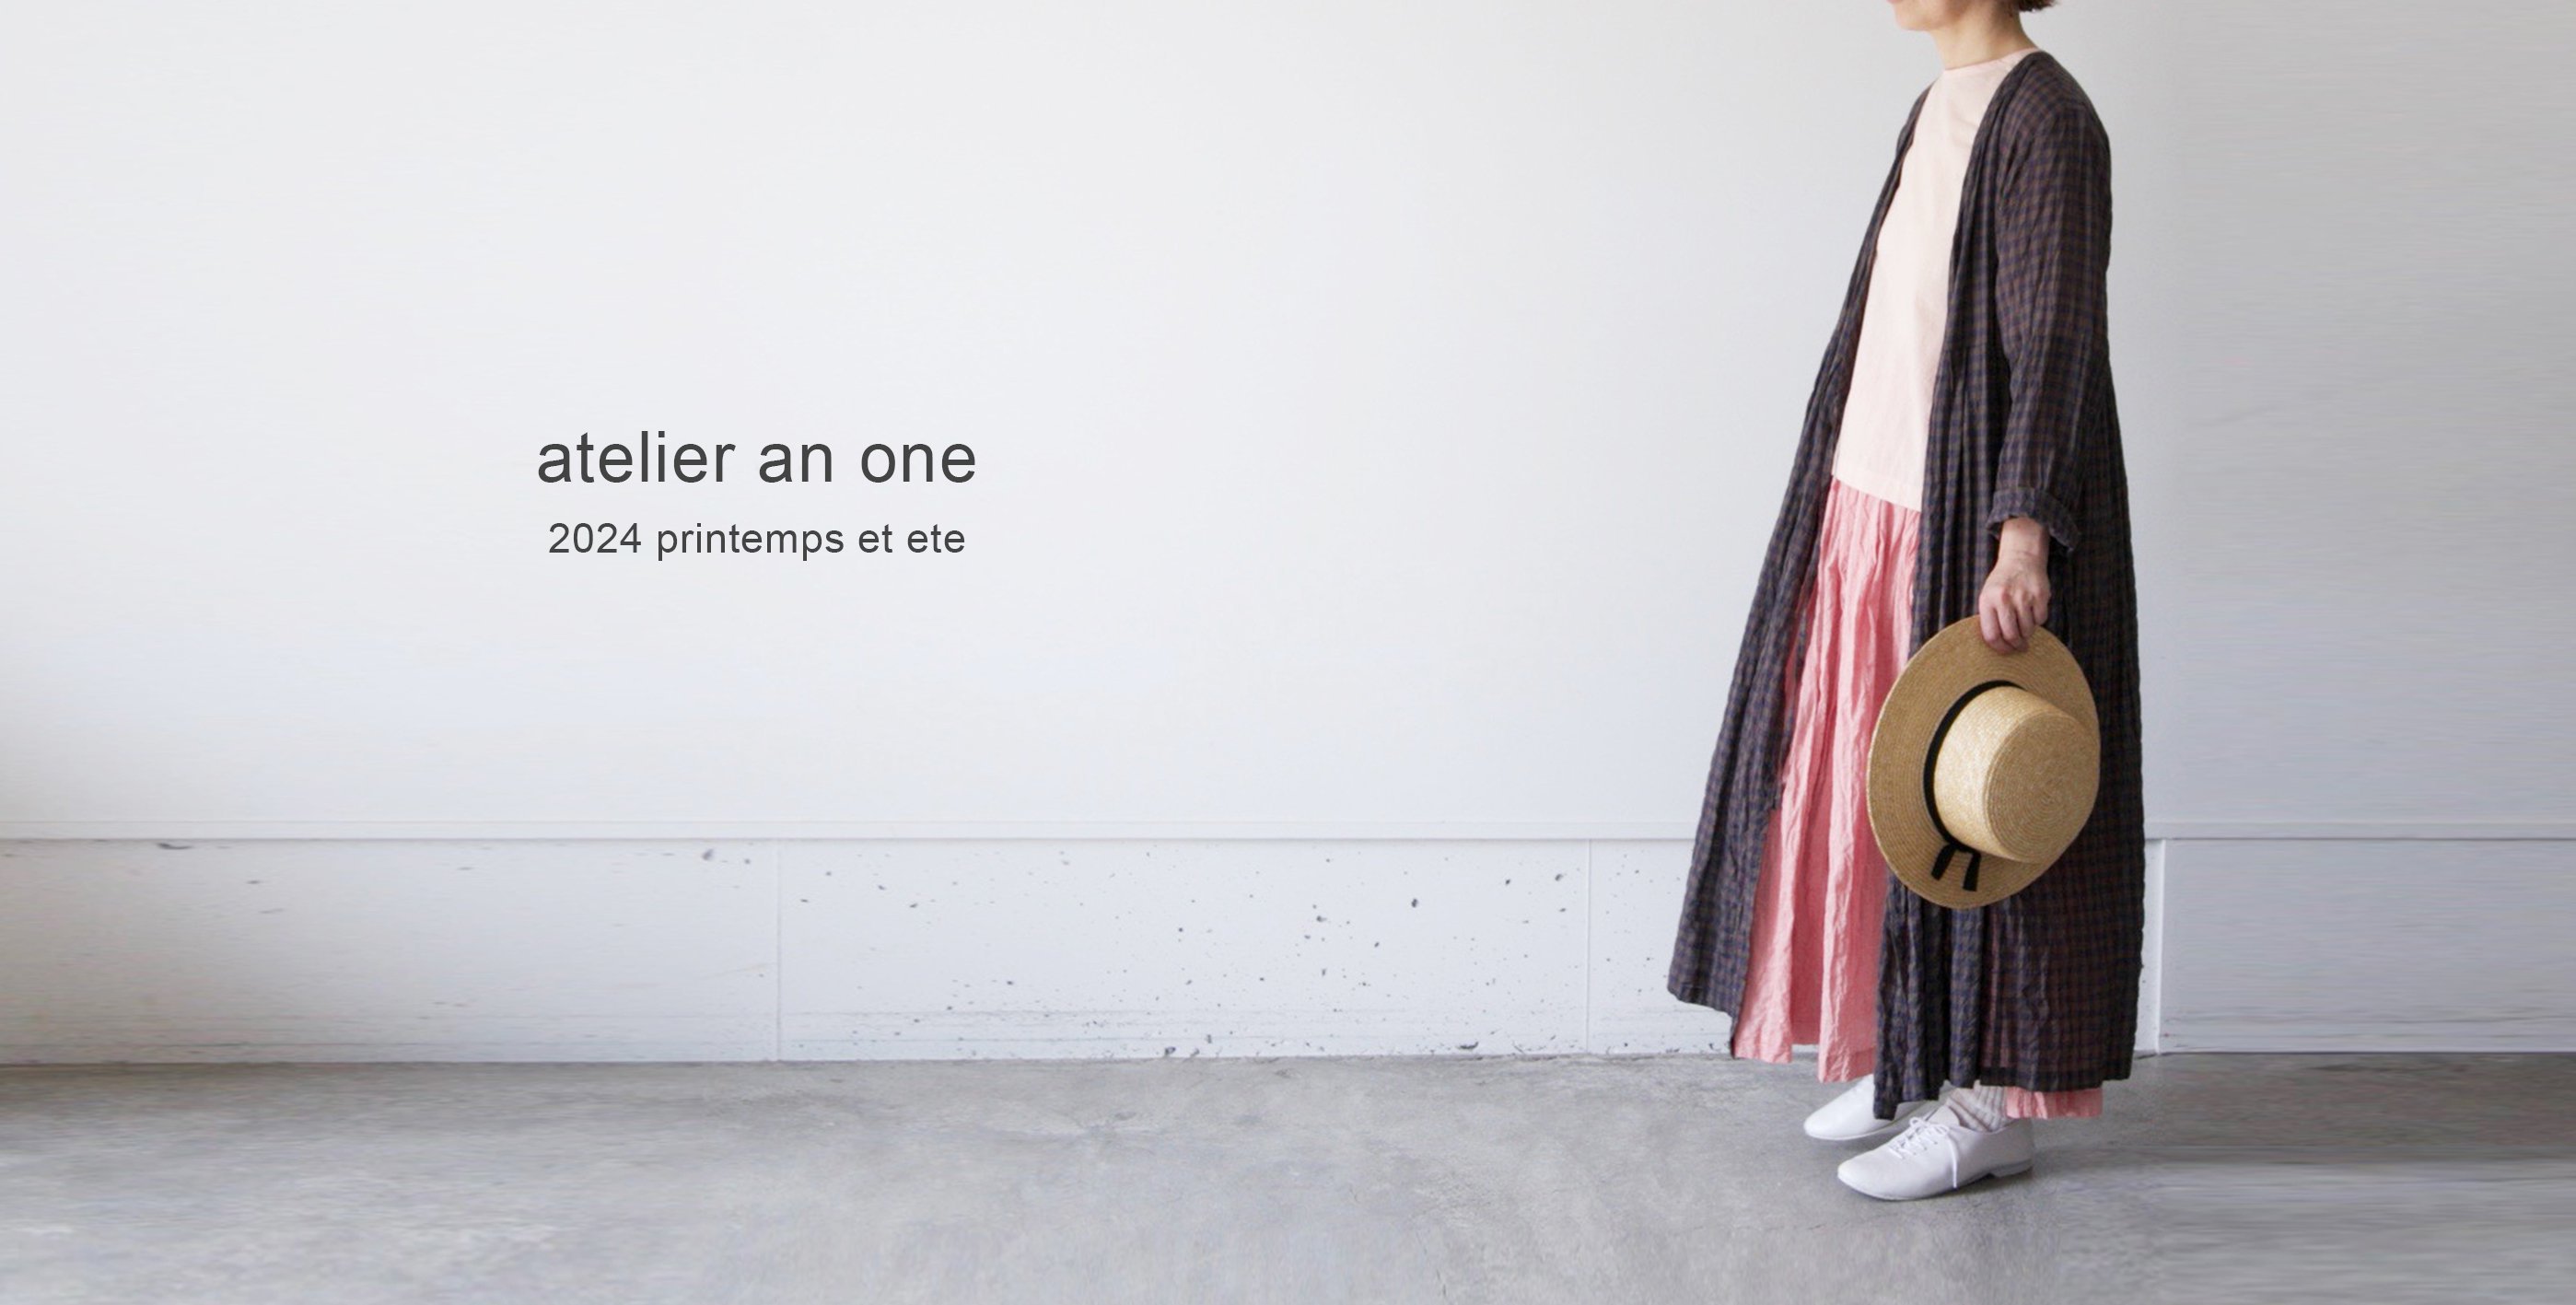 atelier an one - 糸島のアトリエから、しあわせな日常着を。